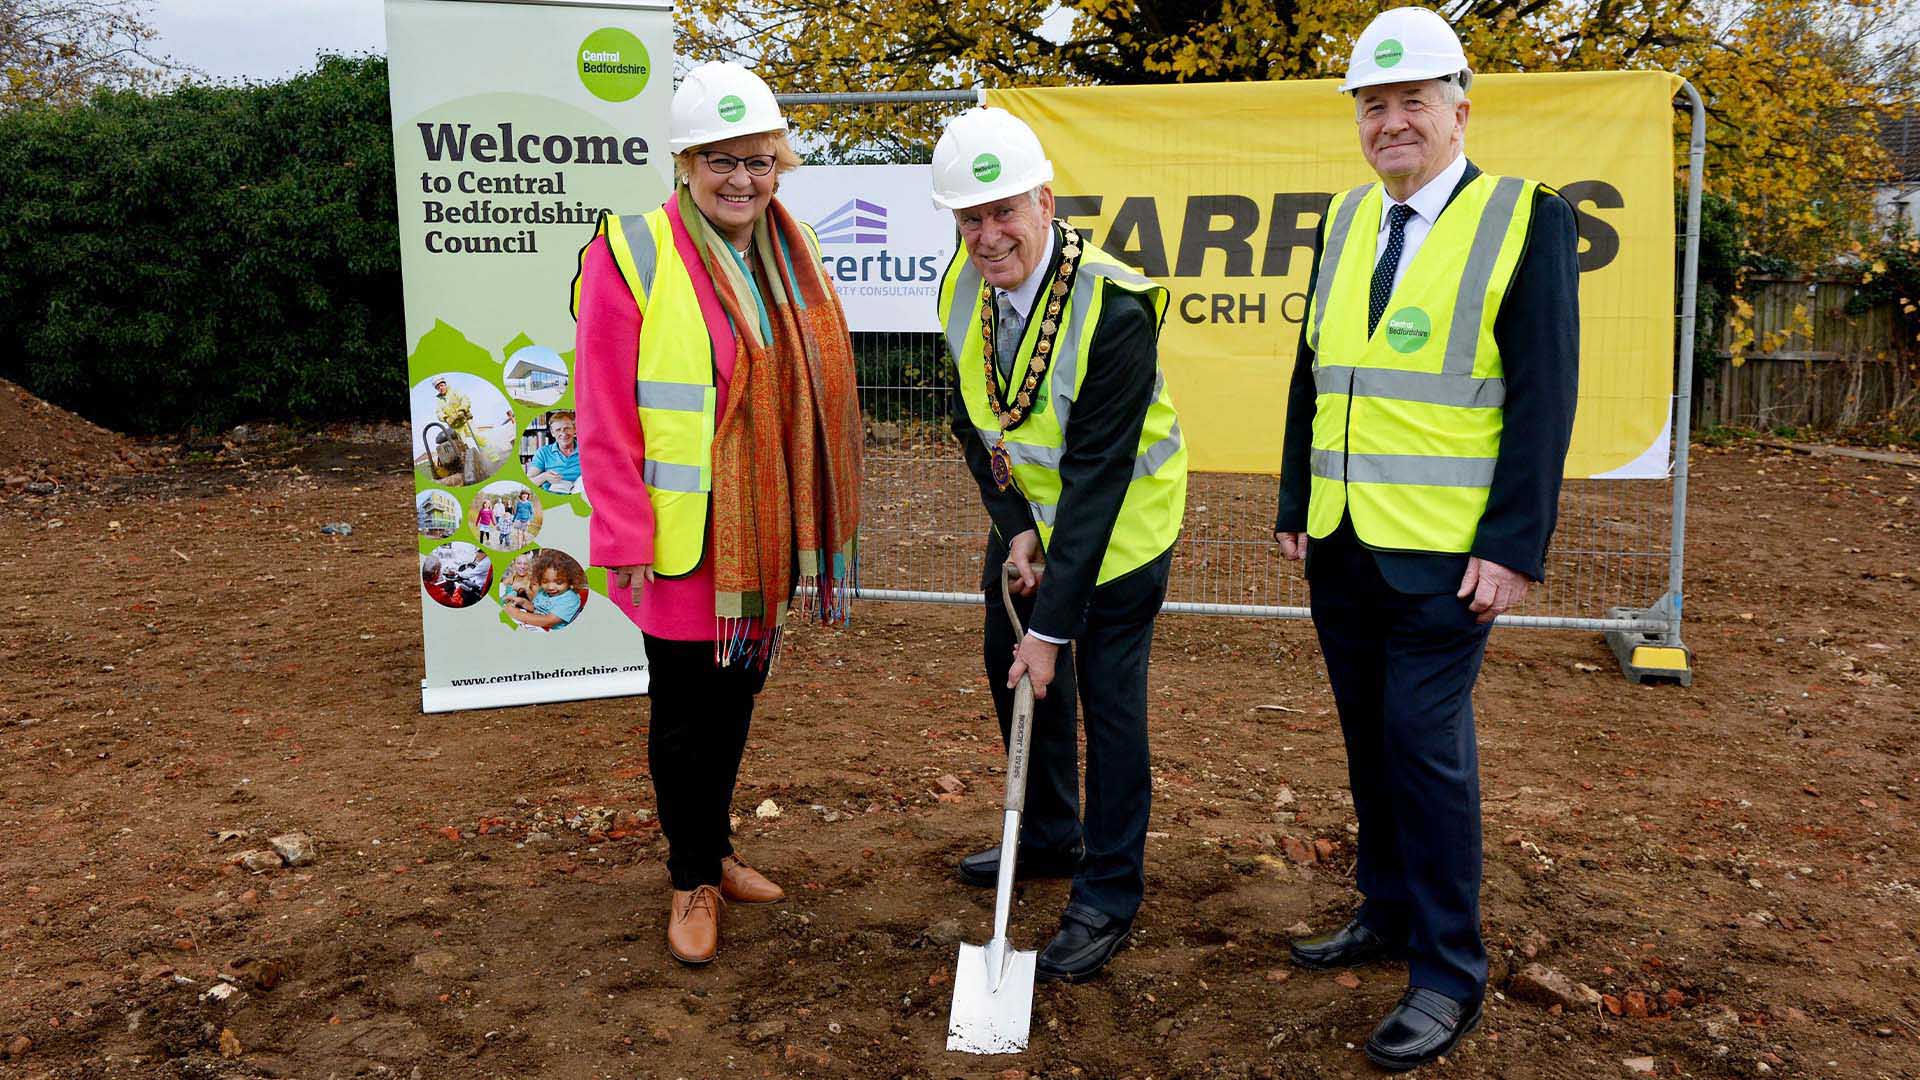 A ground breaking event took place today, Monday 15th November, to celebrate a new £13million development that will see a new older persons home built in Leighton Buzzard